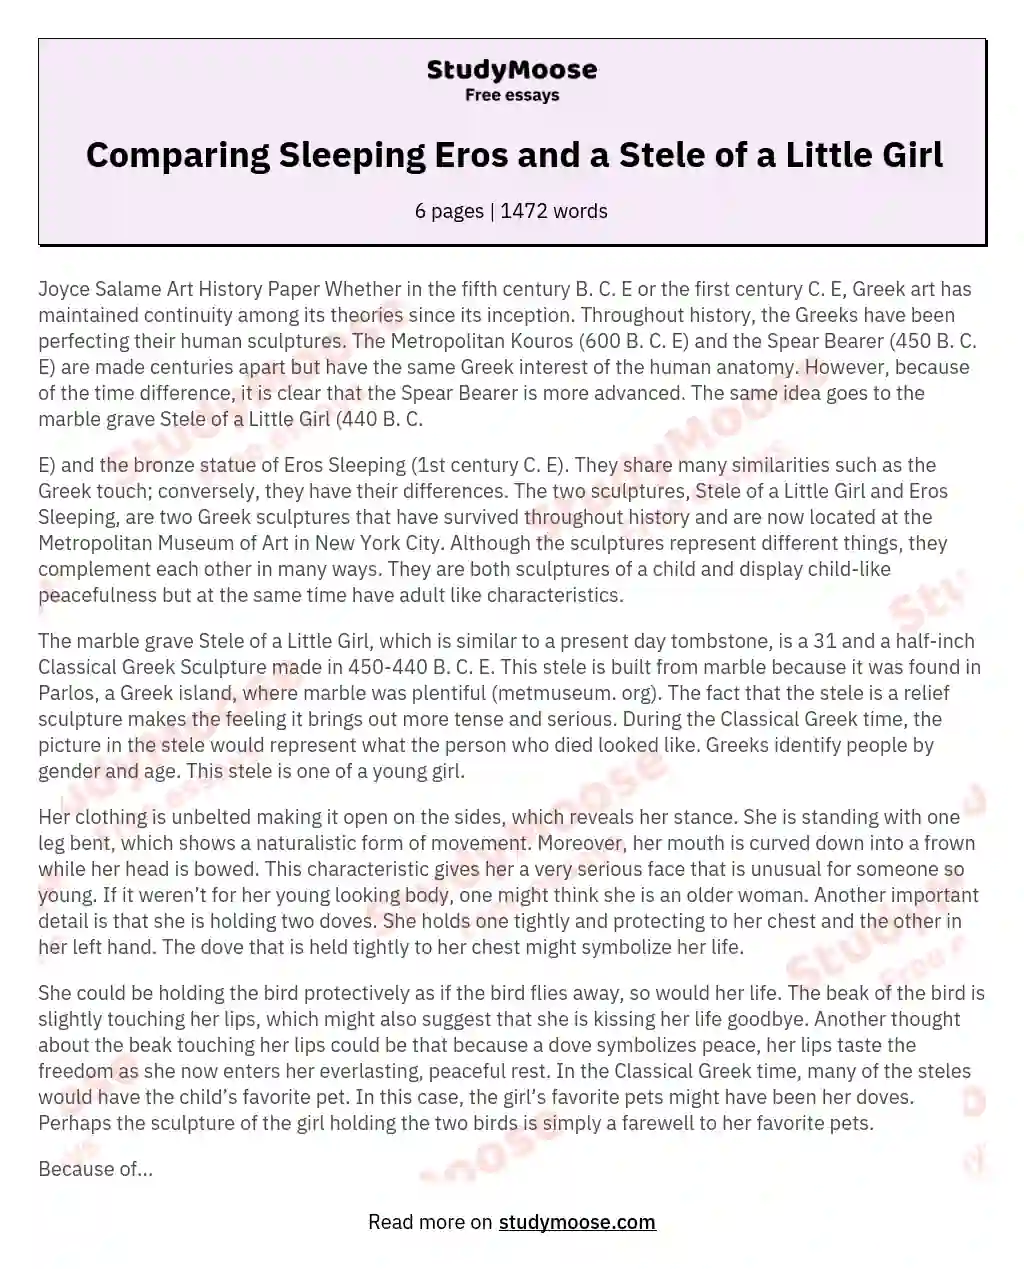 Comparing Sleeping Eros and a Stele of a Little Girl